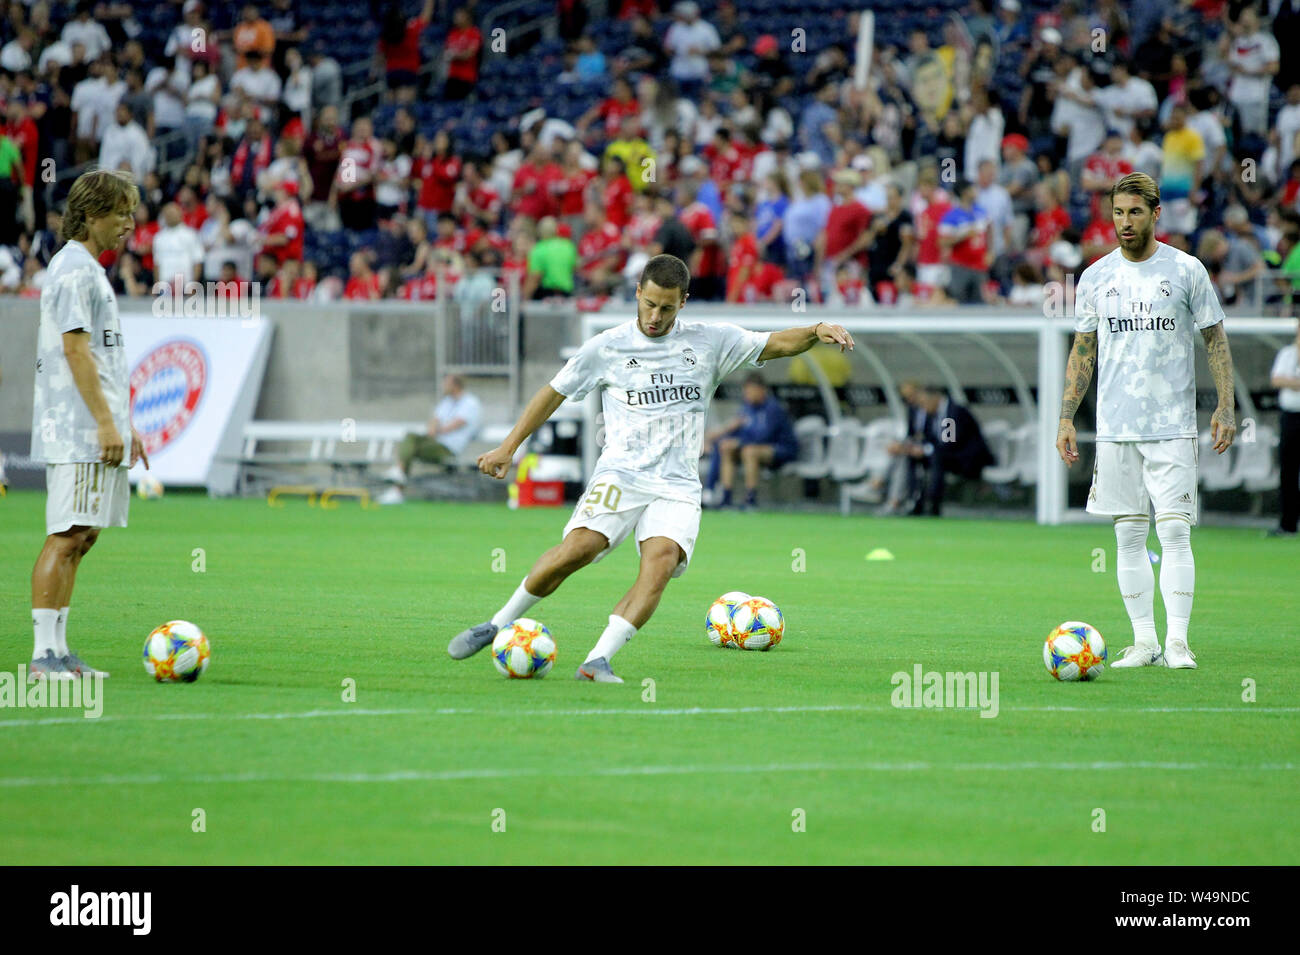 Houston, Texas, USA. 20th July, 2019. (from L-to-R) Real Madrid CF midfielder Luka Modric (10), forward Eden Hazard (50) and defender Sergio Ramos (4) prior to the International Champions Cup soccer match between Real Madrid CF and FC Bayern Munich at NRG Stadium in Houston, TX on July 20, 2019. Credit: Erik Williams/ZUMA Wire/Alamy Live News Stock Photo